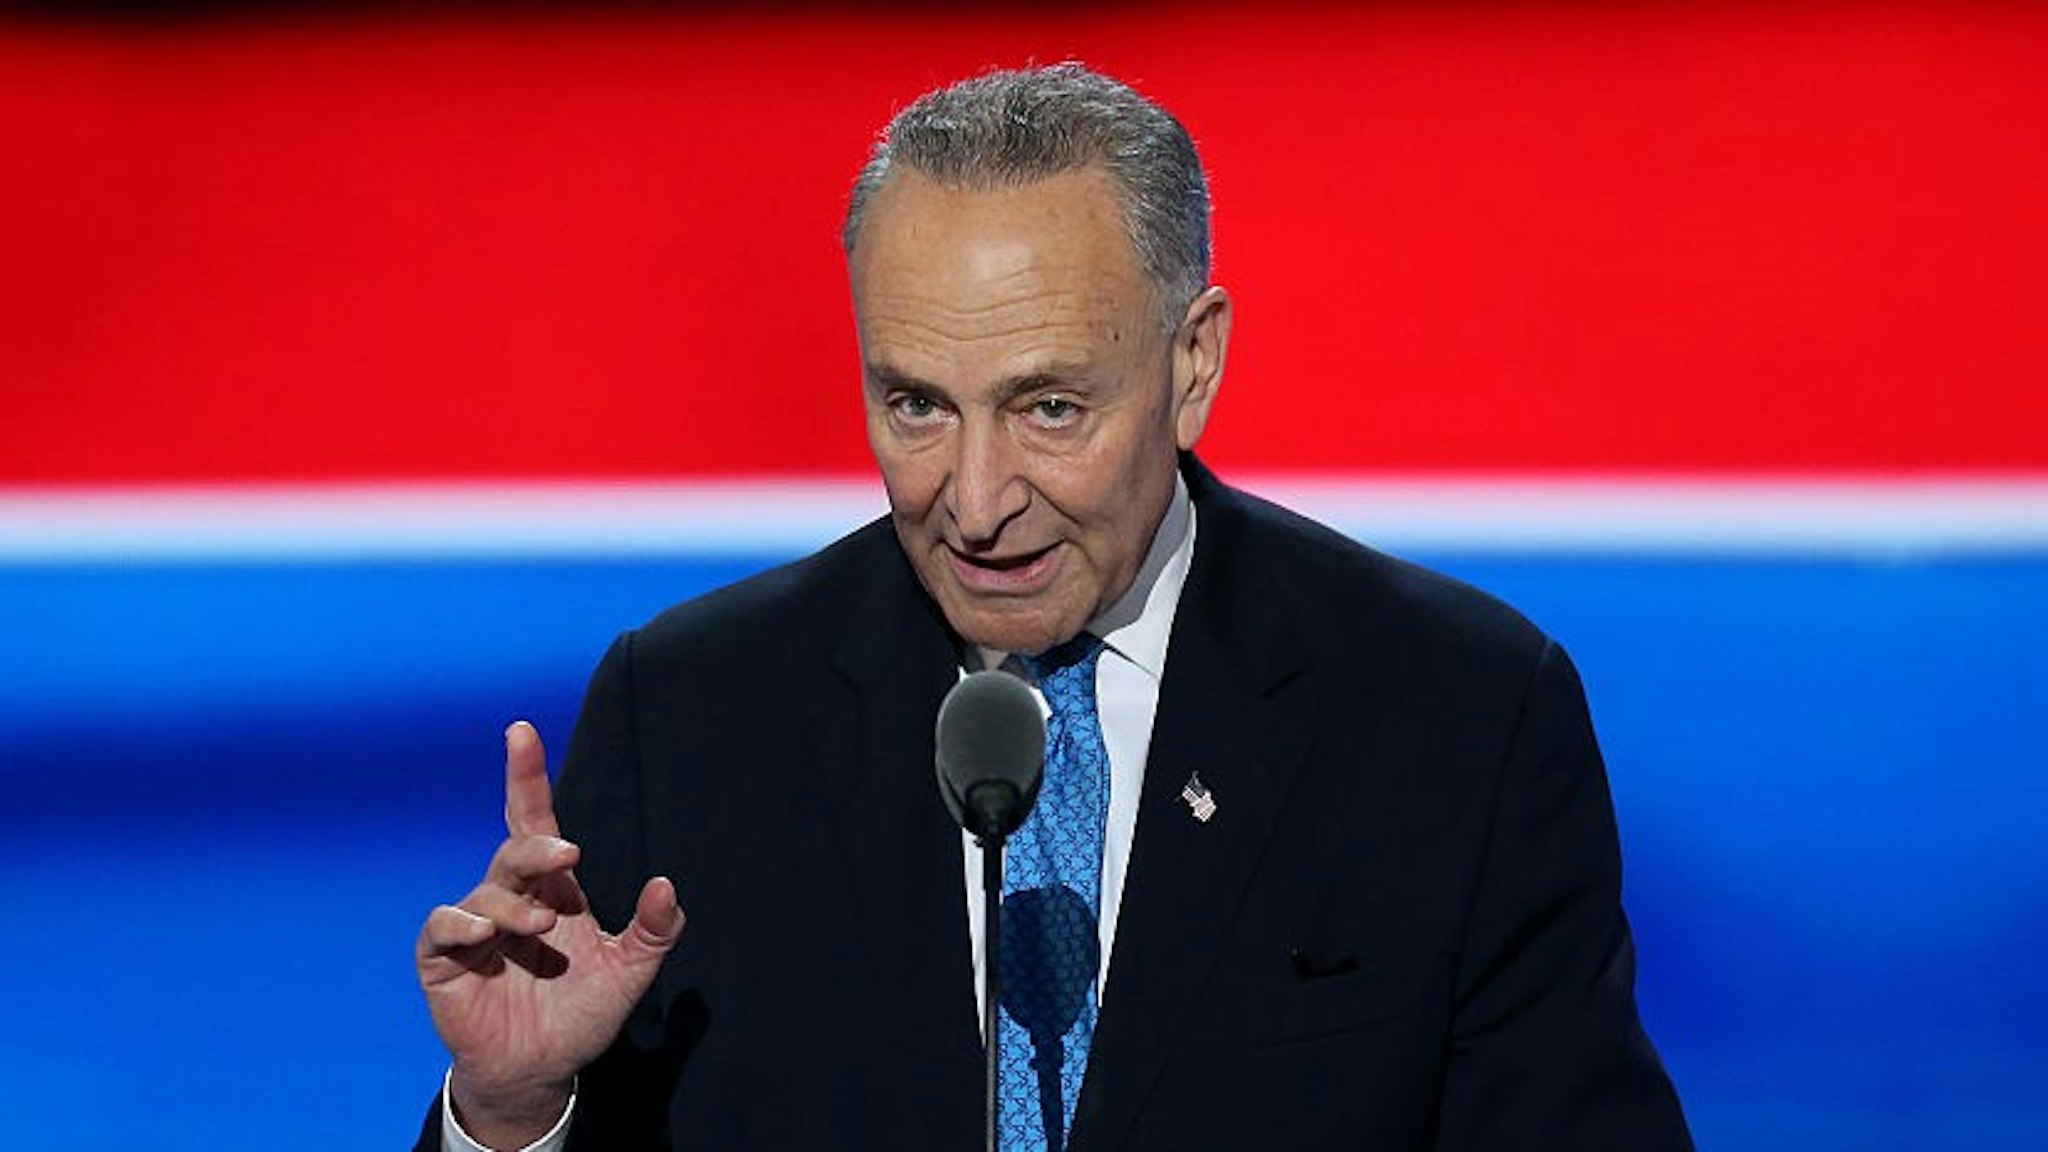 Senator Charles "Chuck" Schumer, a Democrat from New York, speaks during the Democratic National Convention (DNC) in Philadelphia, Pennsylvania, U.S., on Tuesday, July 26, 2016. Democrats began their presidential nominating convention Monday with a struggle to fully unite the party, following a dramatic day of internal squabbling and protests.